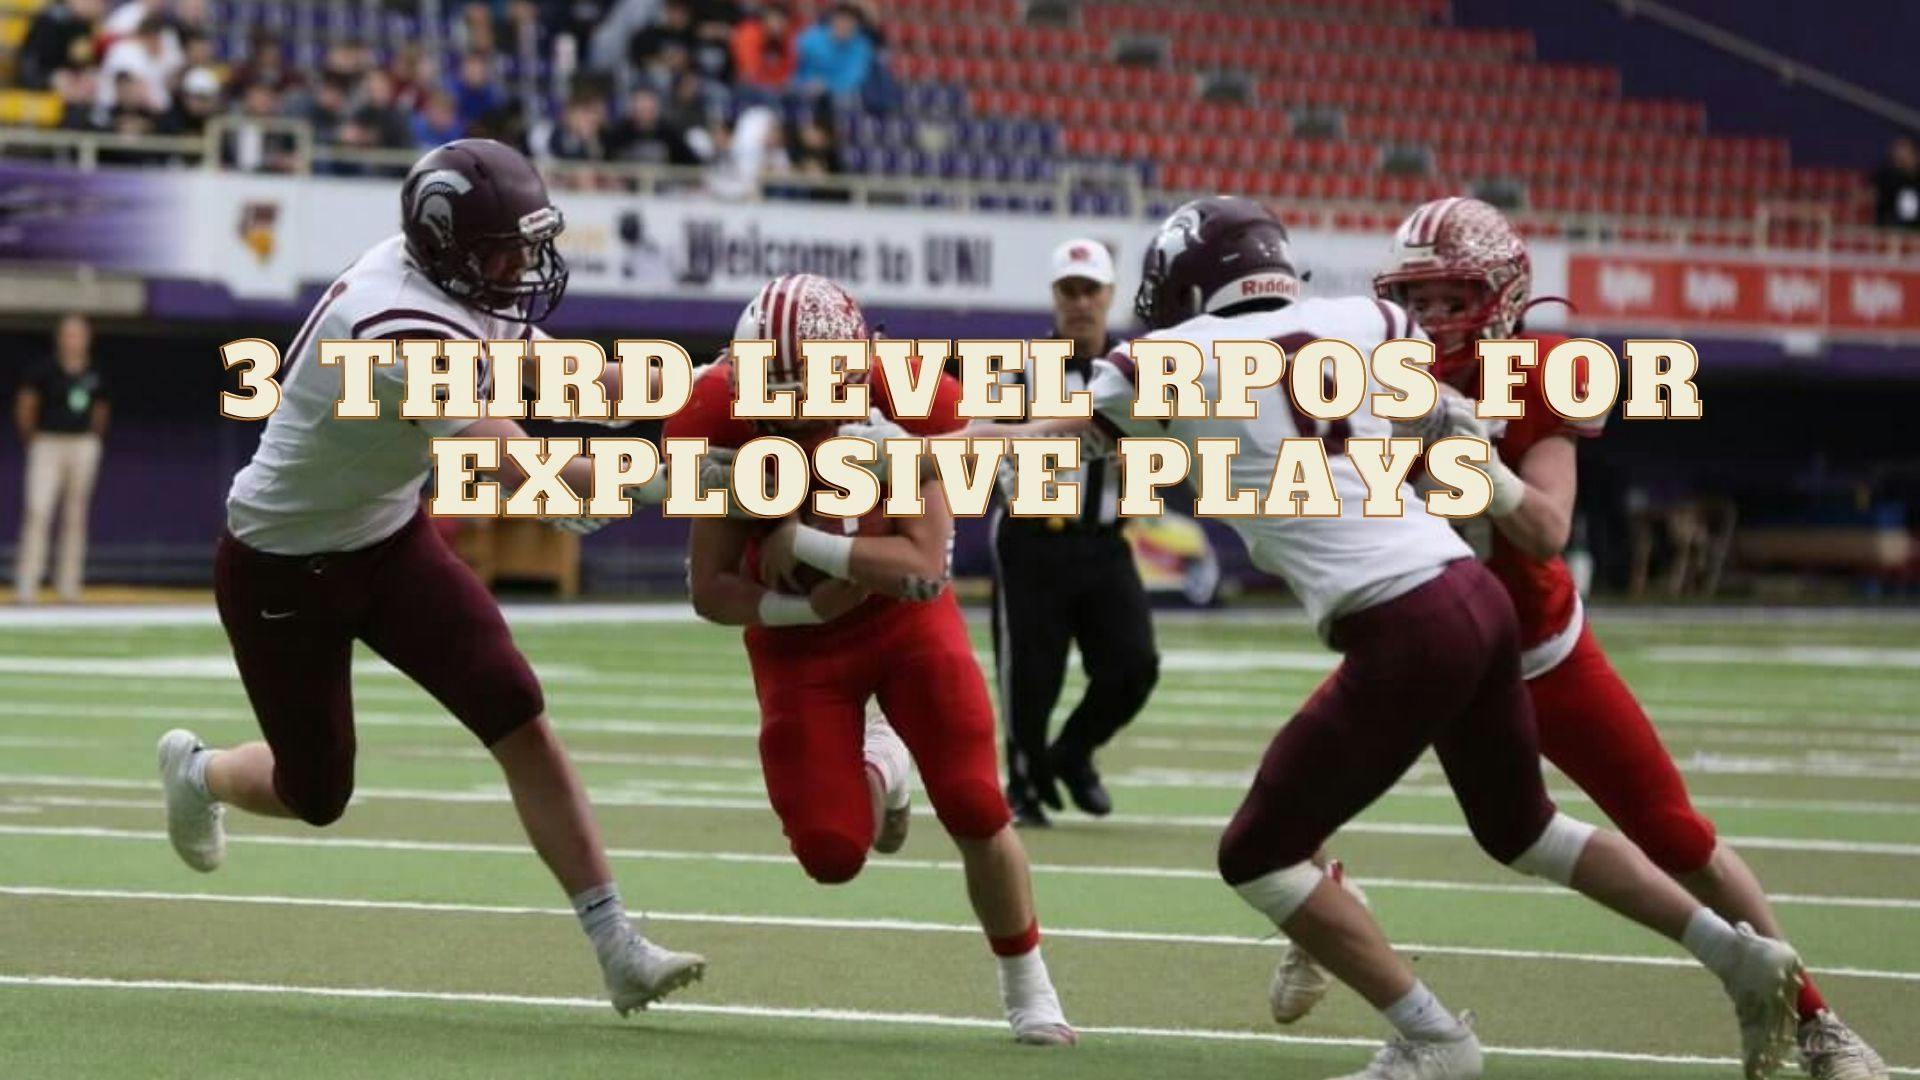 3 Third Level RPOs for Explosive Plays